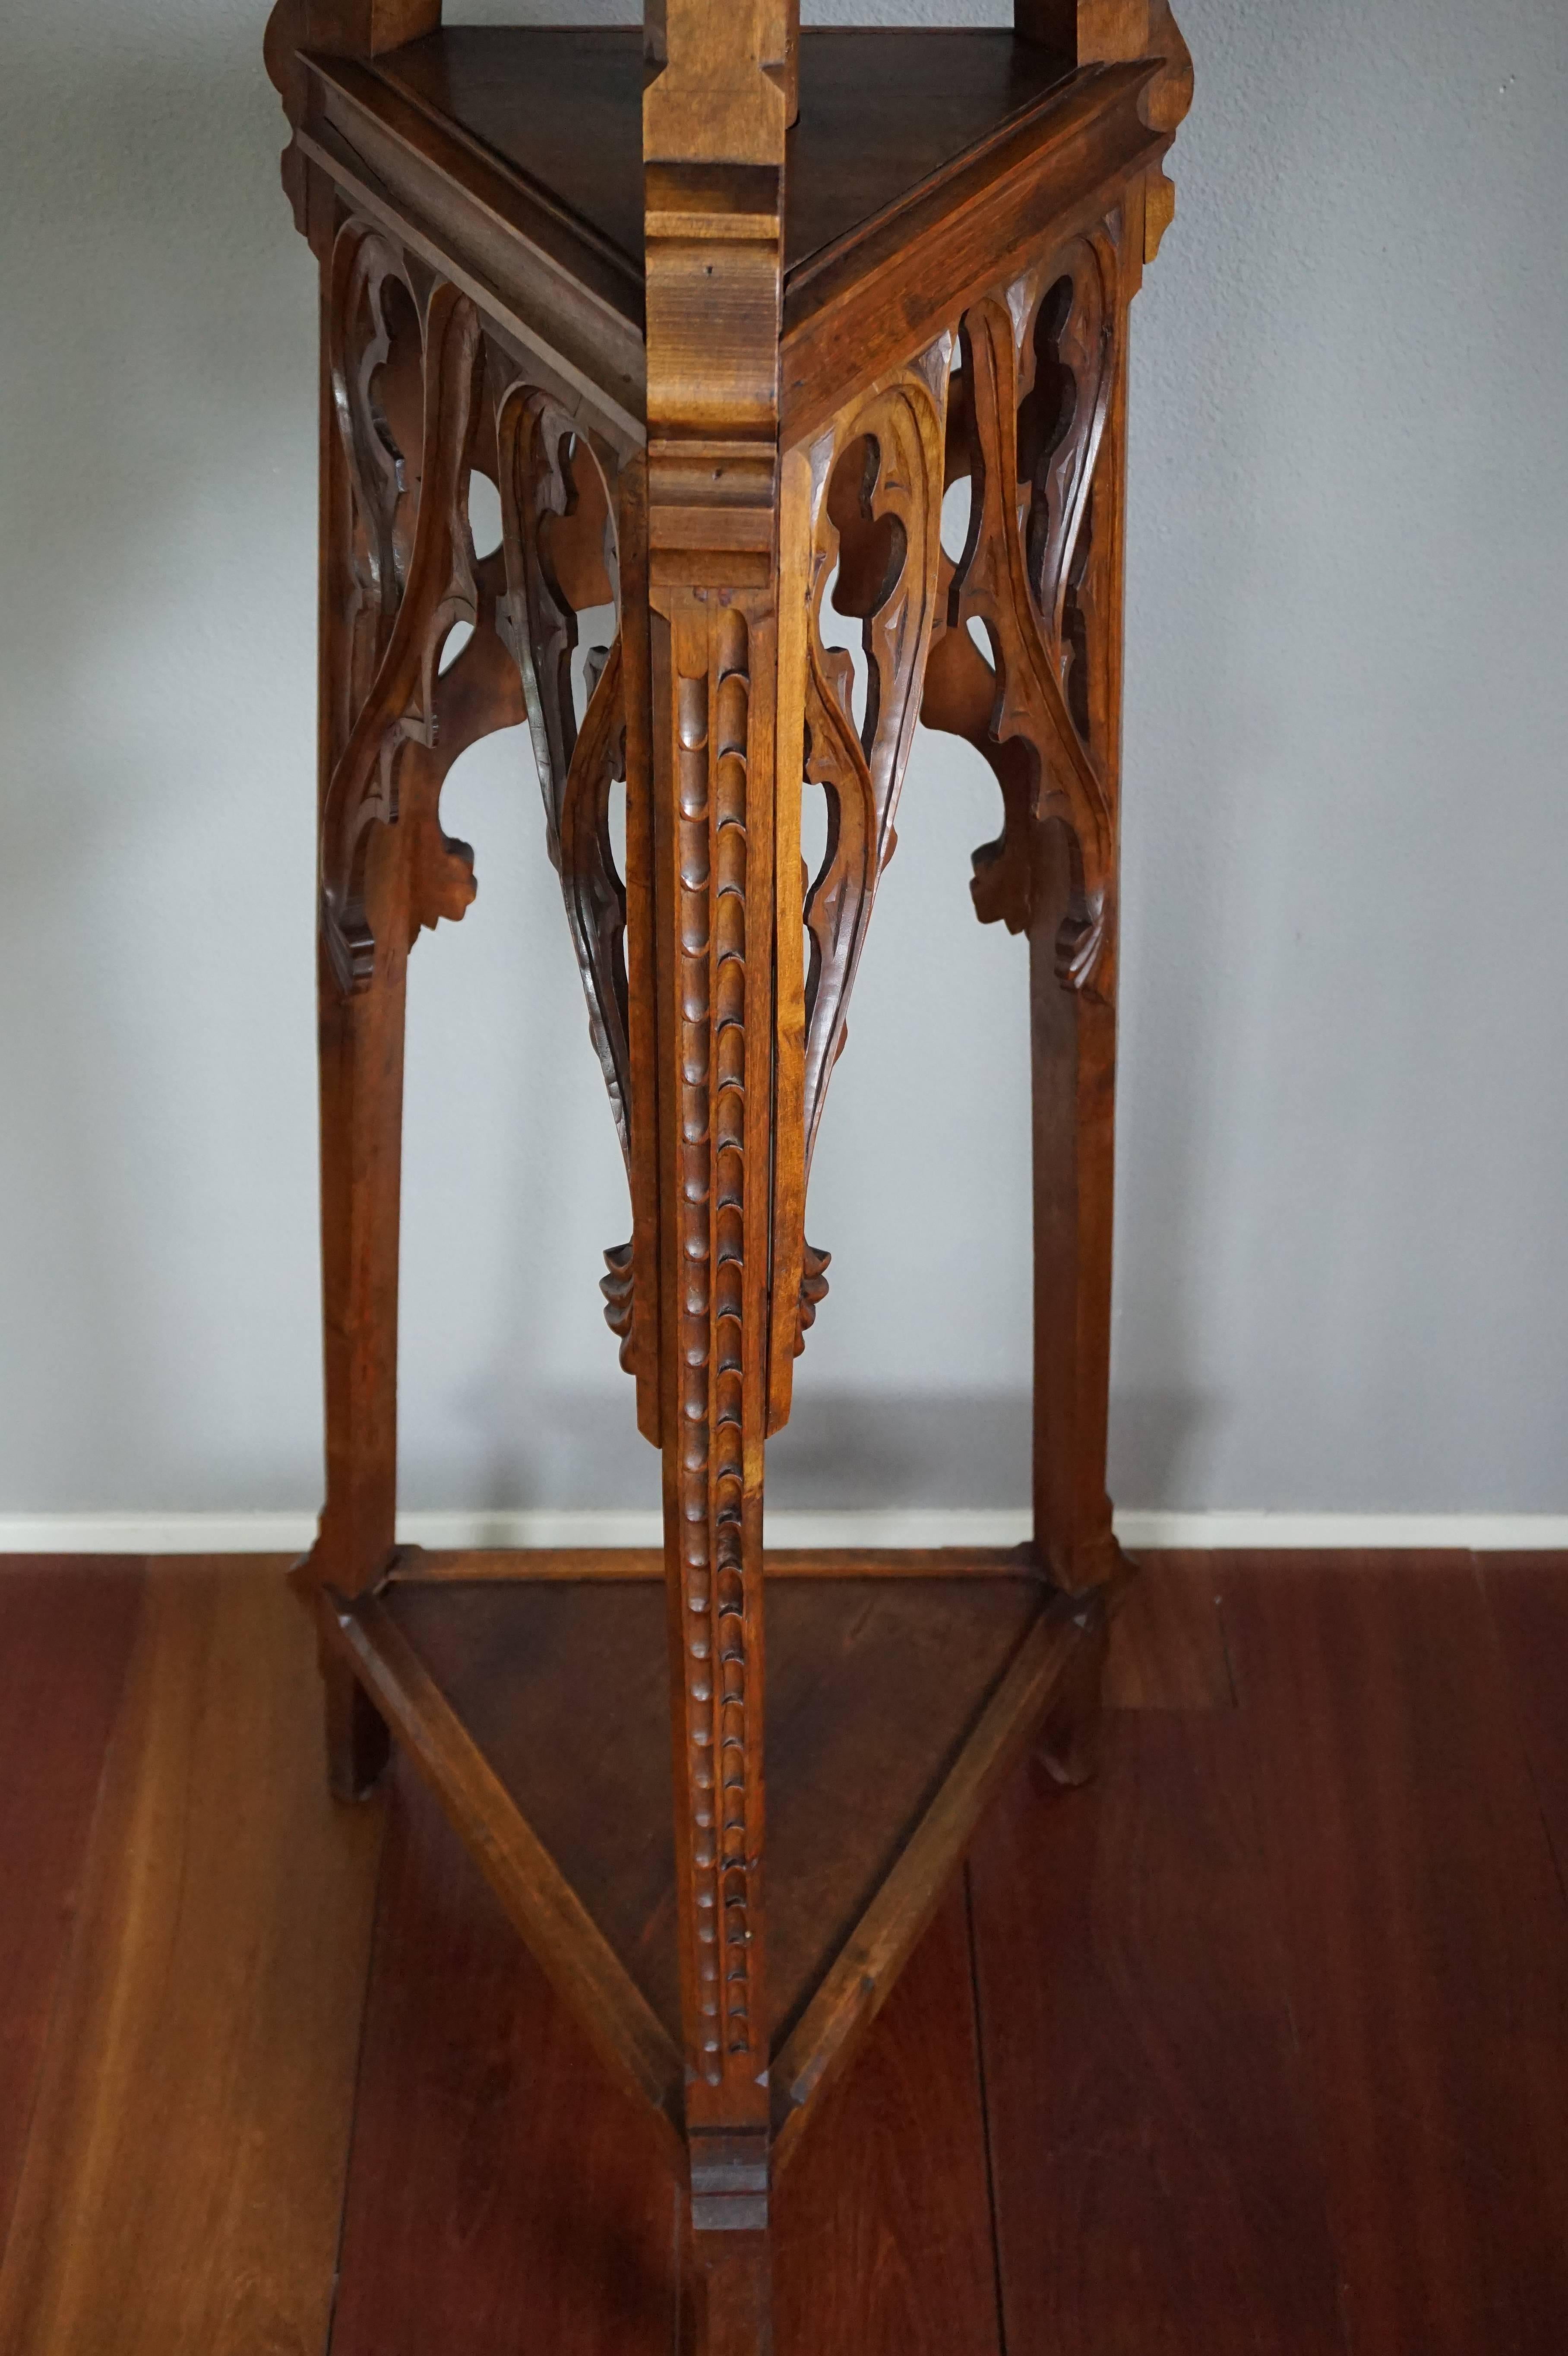 Wood Antique and Large Hand Carved Gothic Revival Studio Work Easel / Sculpture Stand